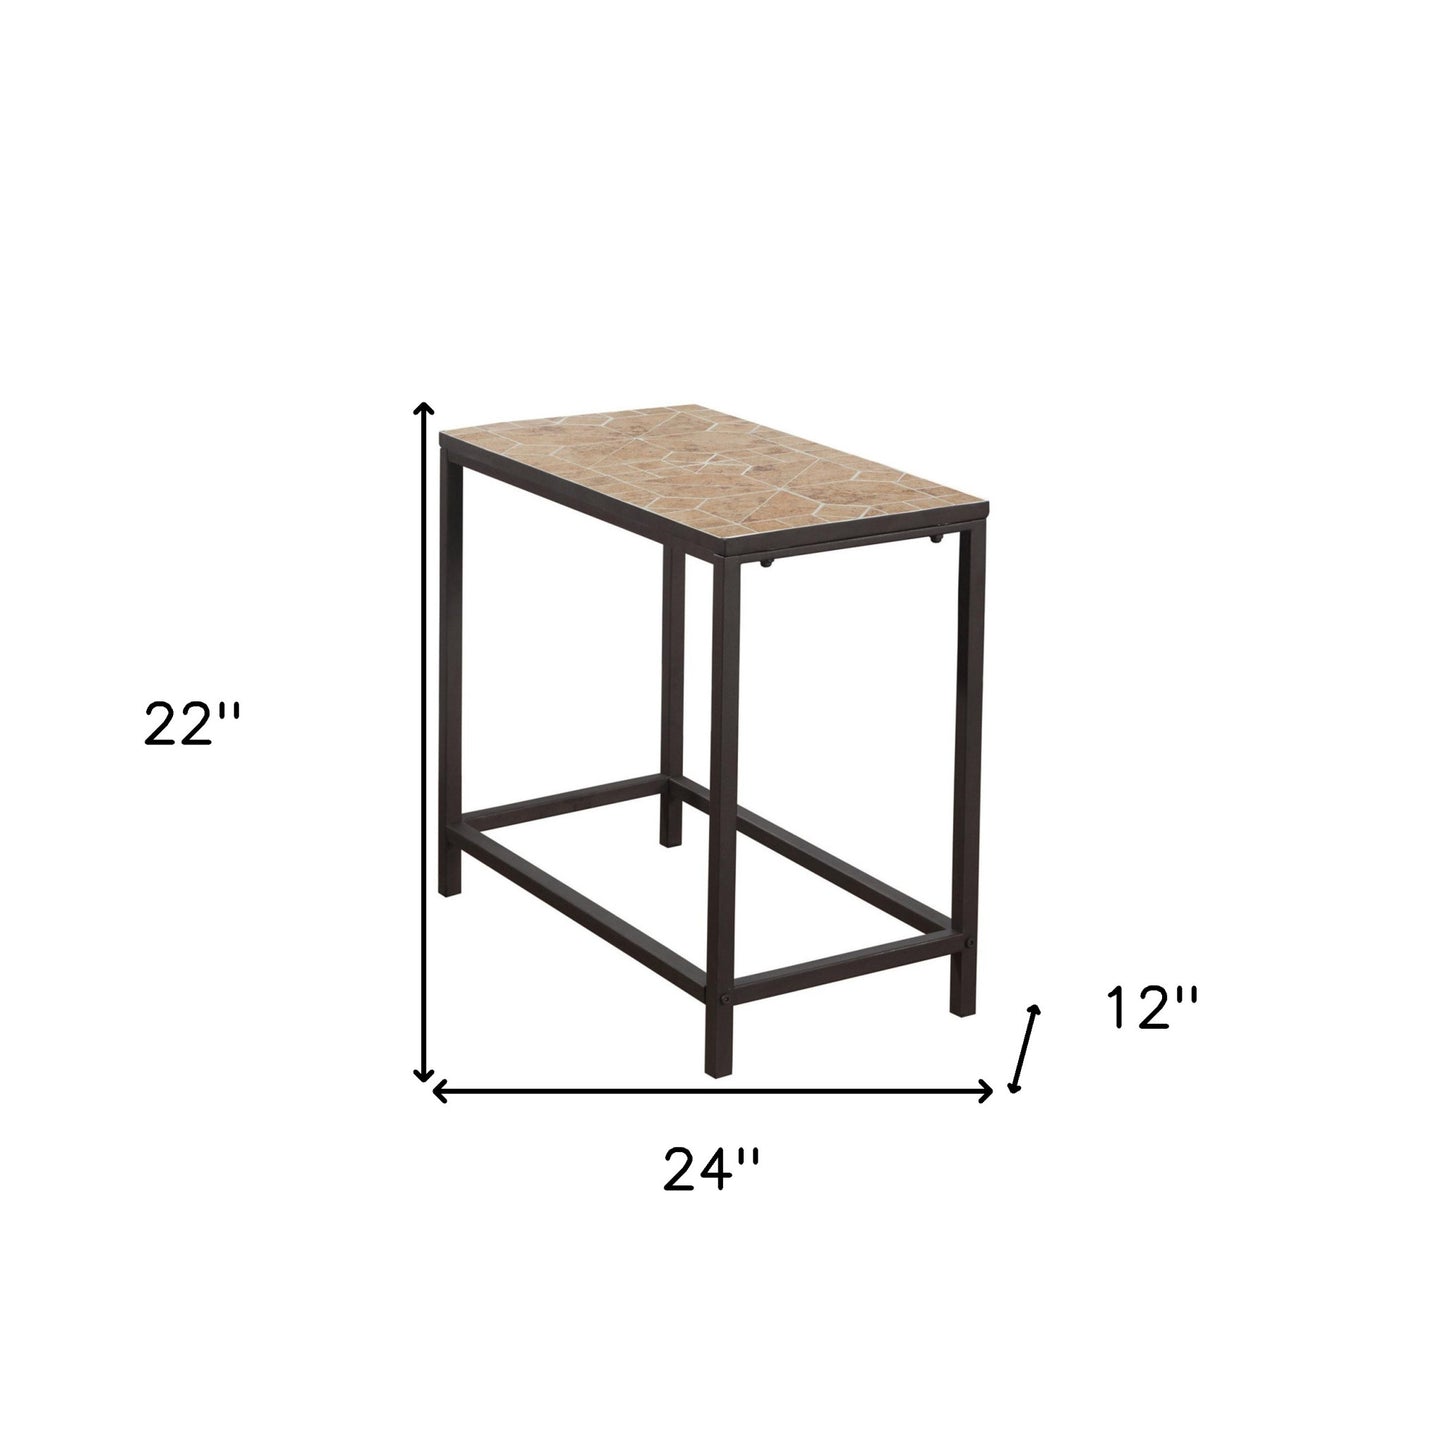 22" Brown Tile End Table By Homeroots